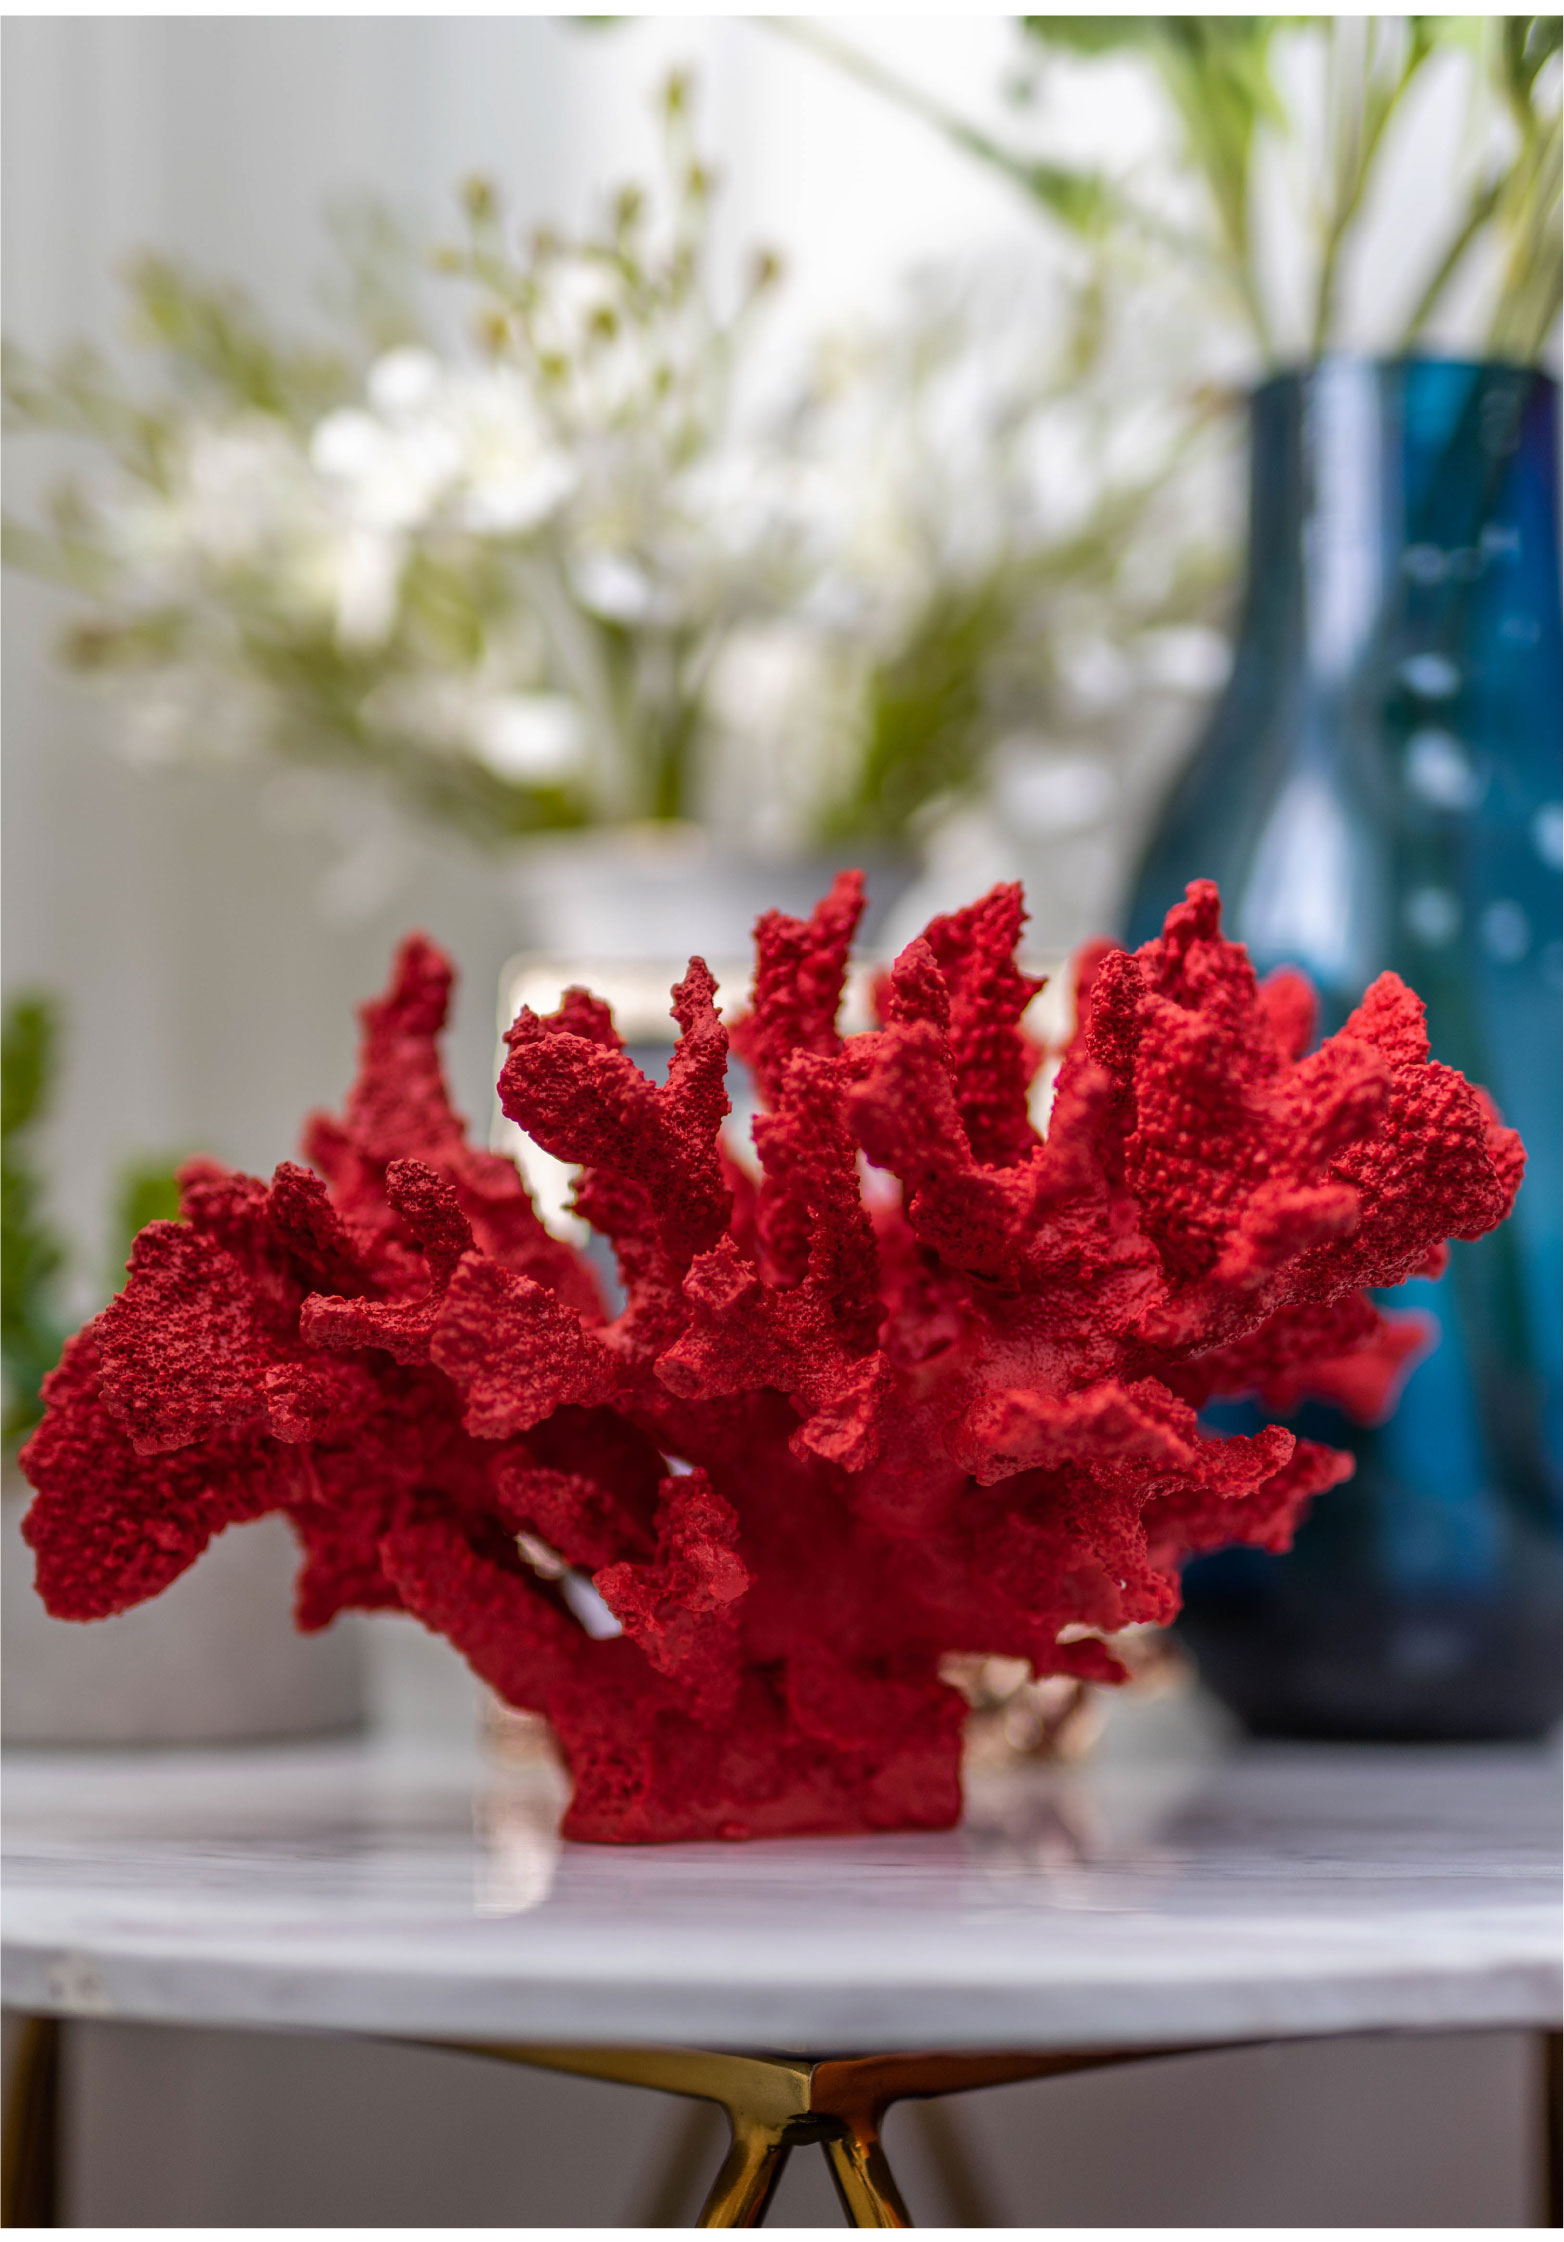 Mediterranean White Red Coral Sculpture Figurine Ornaments Plant Office Home Decoracion Accessories moderno Art Resin Craft Gift